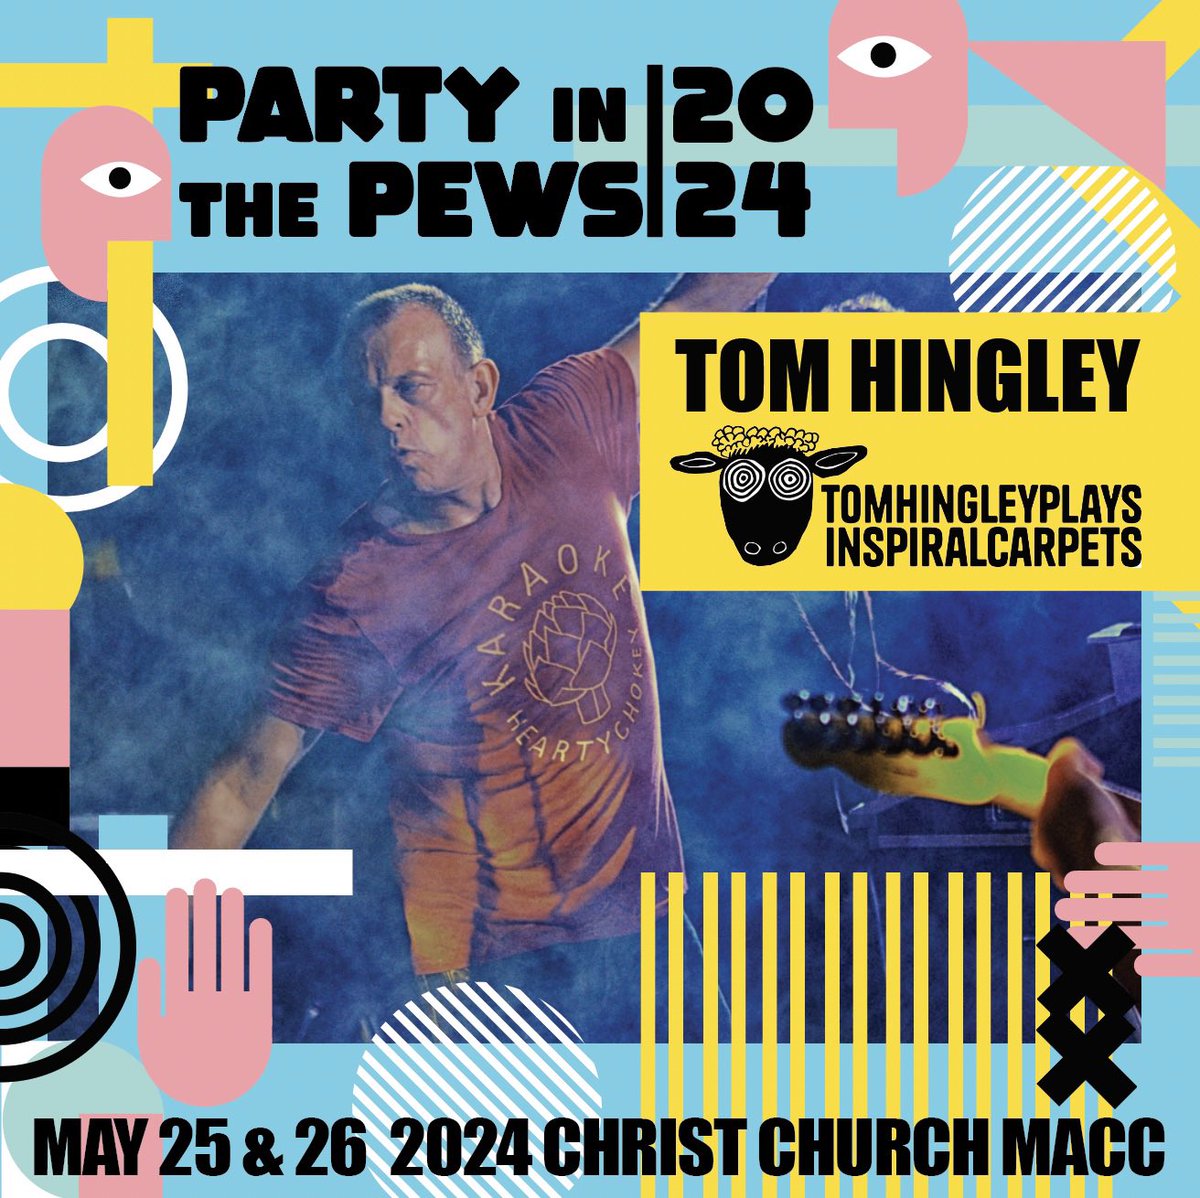 We have another announcement! Returning to Christ Church in May we have @tomhingleymusic ex front man of Inspiral Carpets. Tom joined Inspiral Carpets as lead vocalist in 1989 until they broke up in 1995 being the voice of hits ‘This is how it feels’ & ‘Saturn 5’.